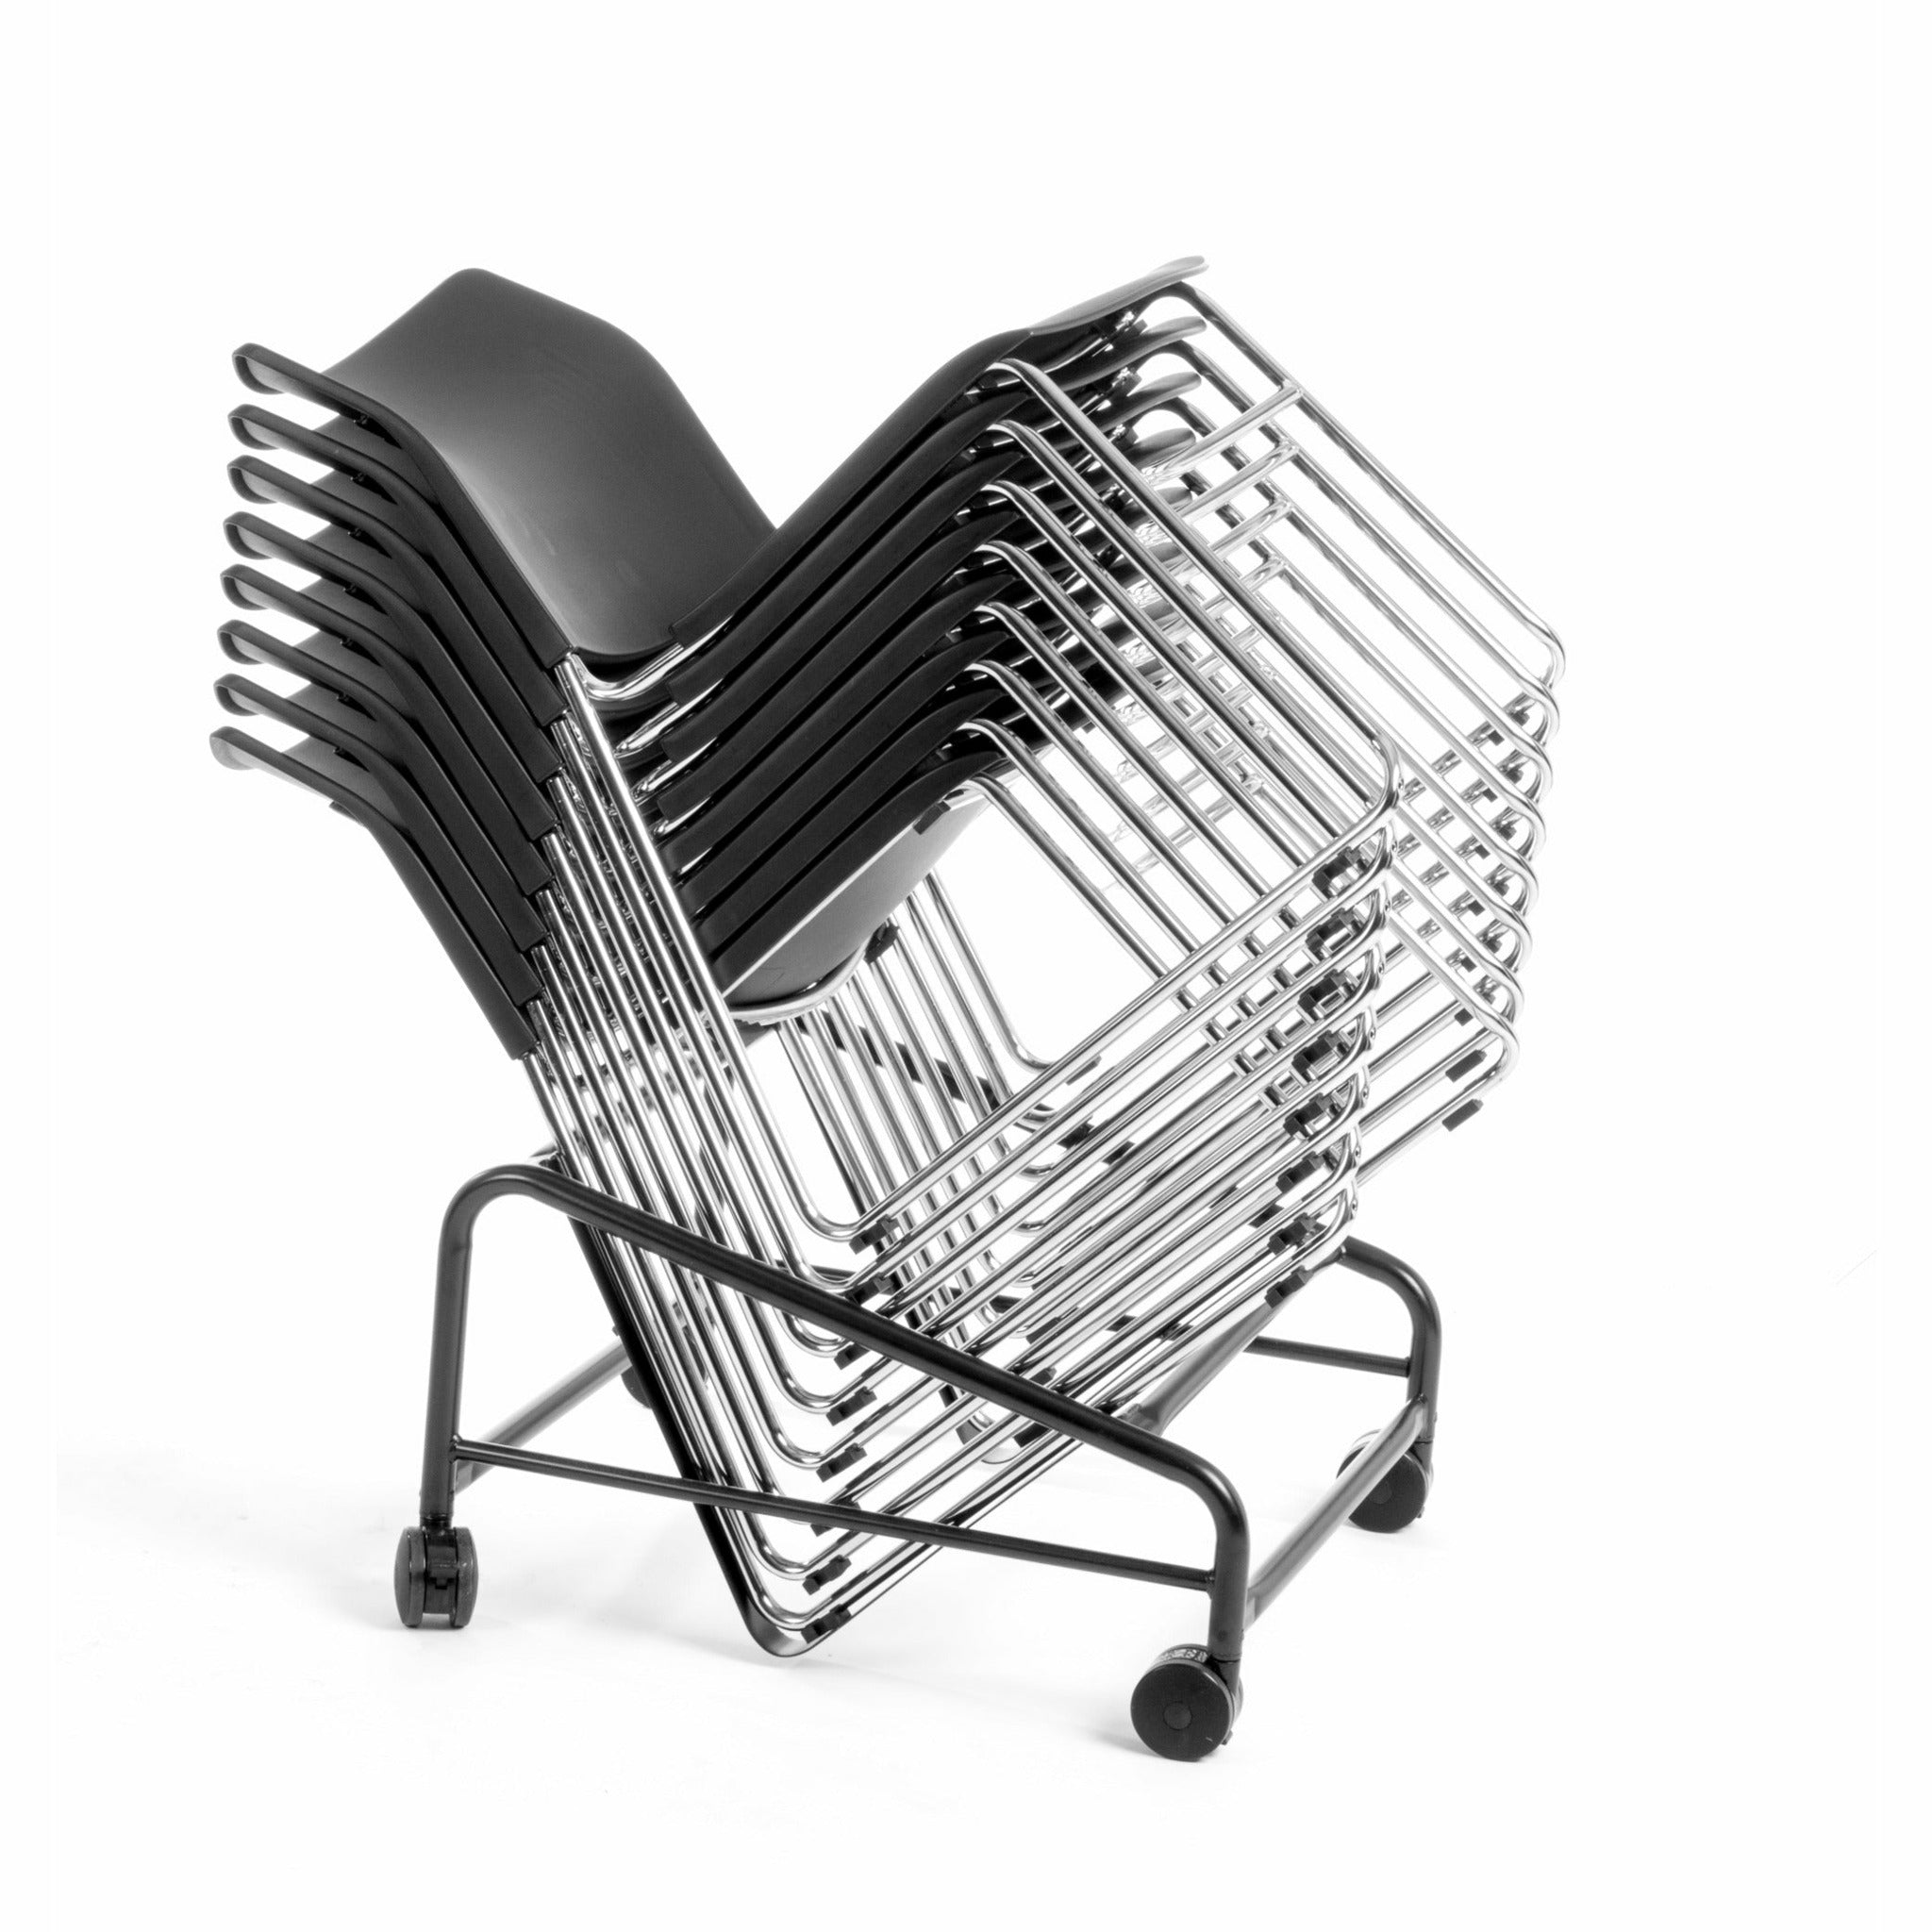 CS One Visitor Chair